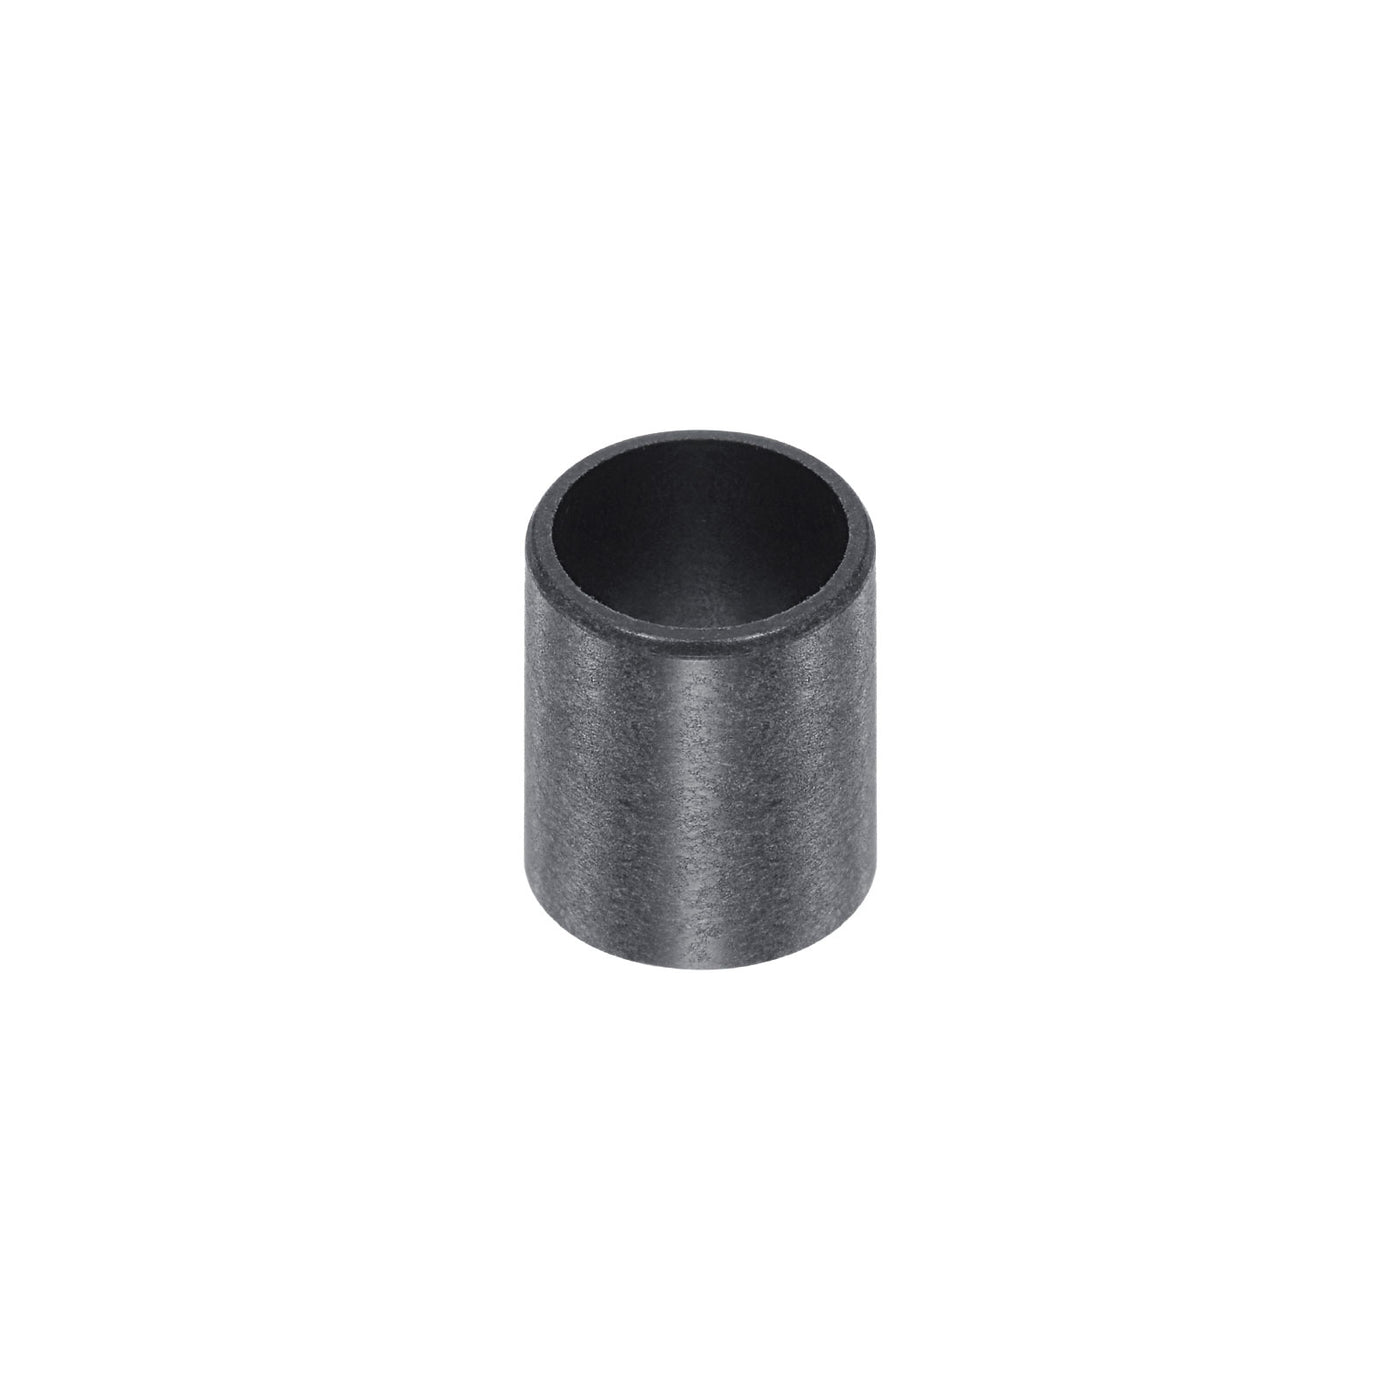 uxcell Uxcell Sleeve Bearings 10mmx12mmx15mm POM Wrapped Oilless Bushings Black